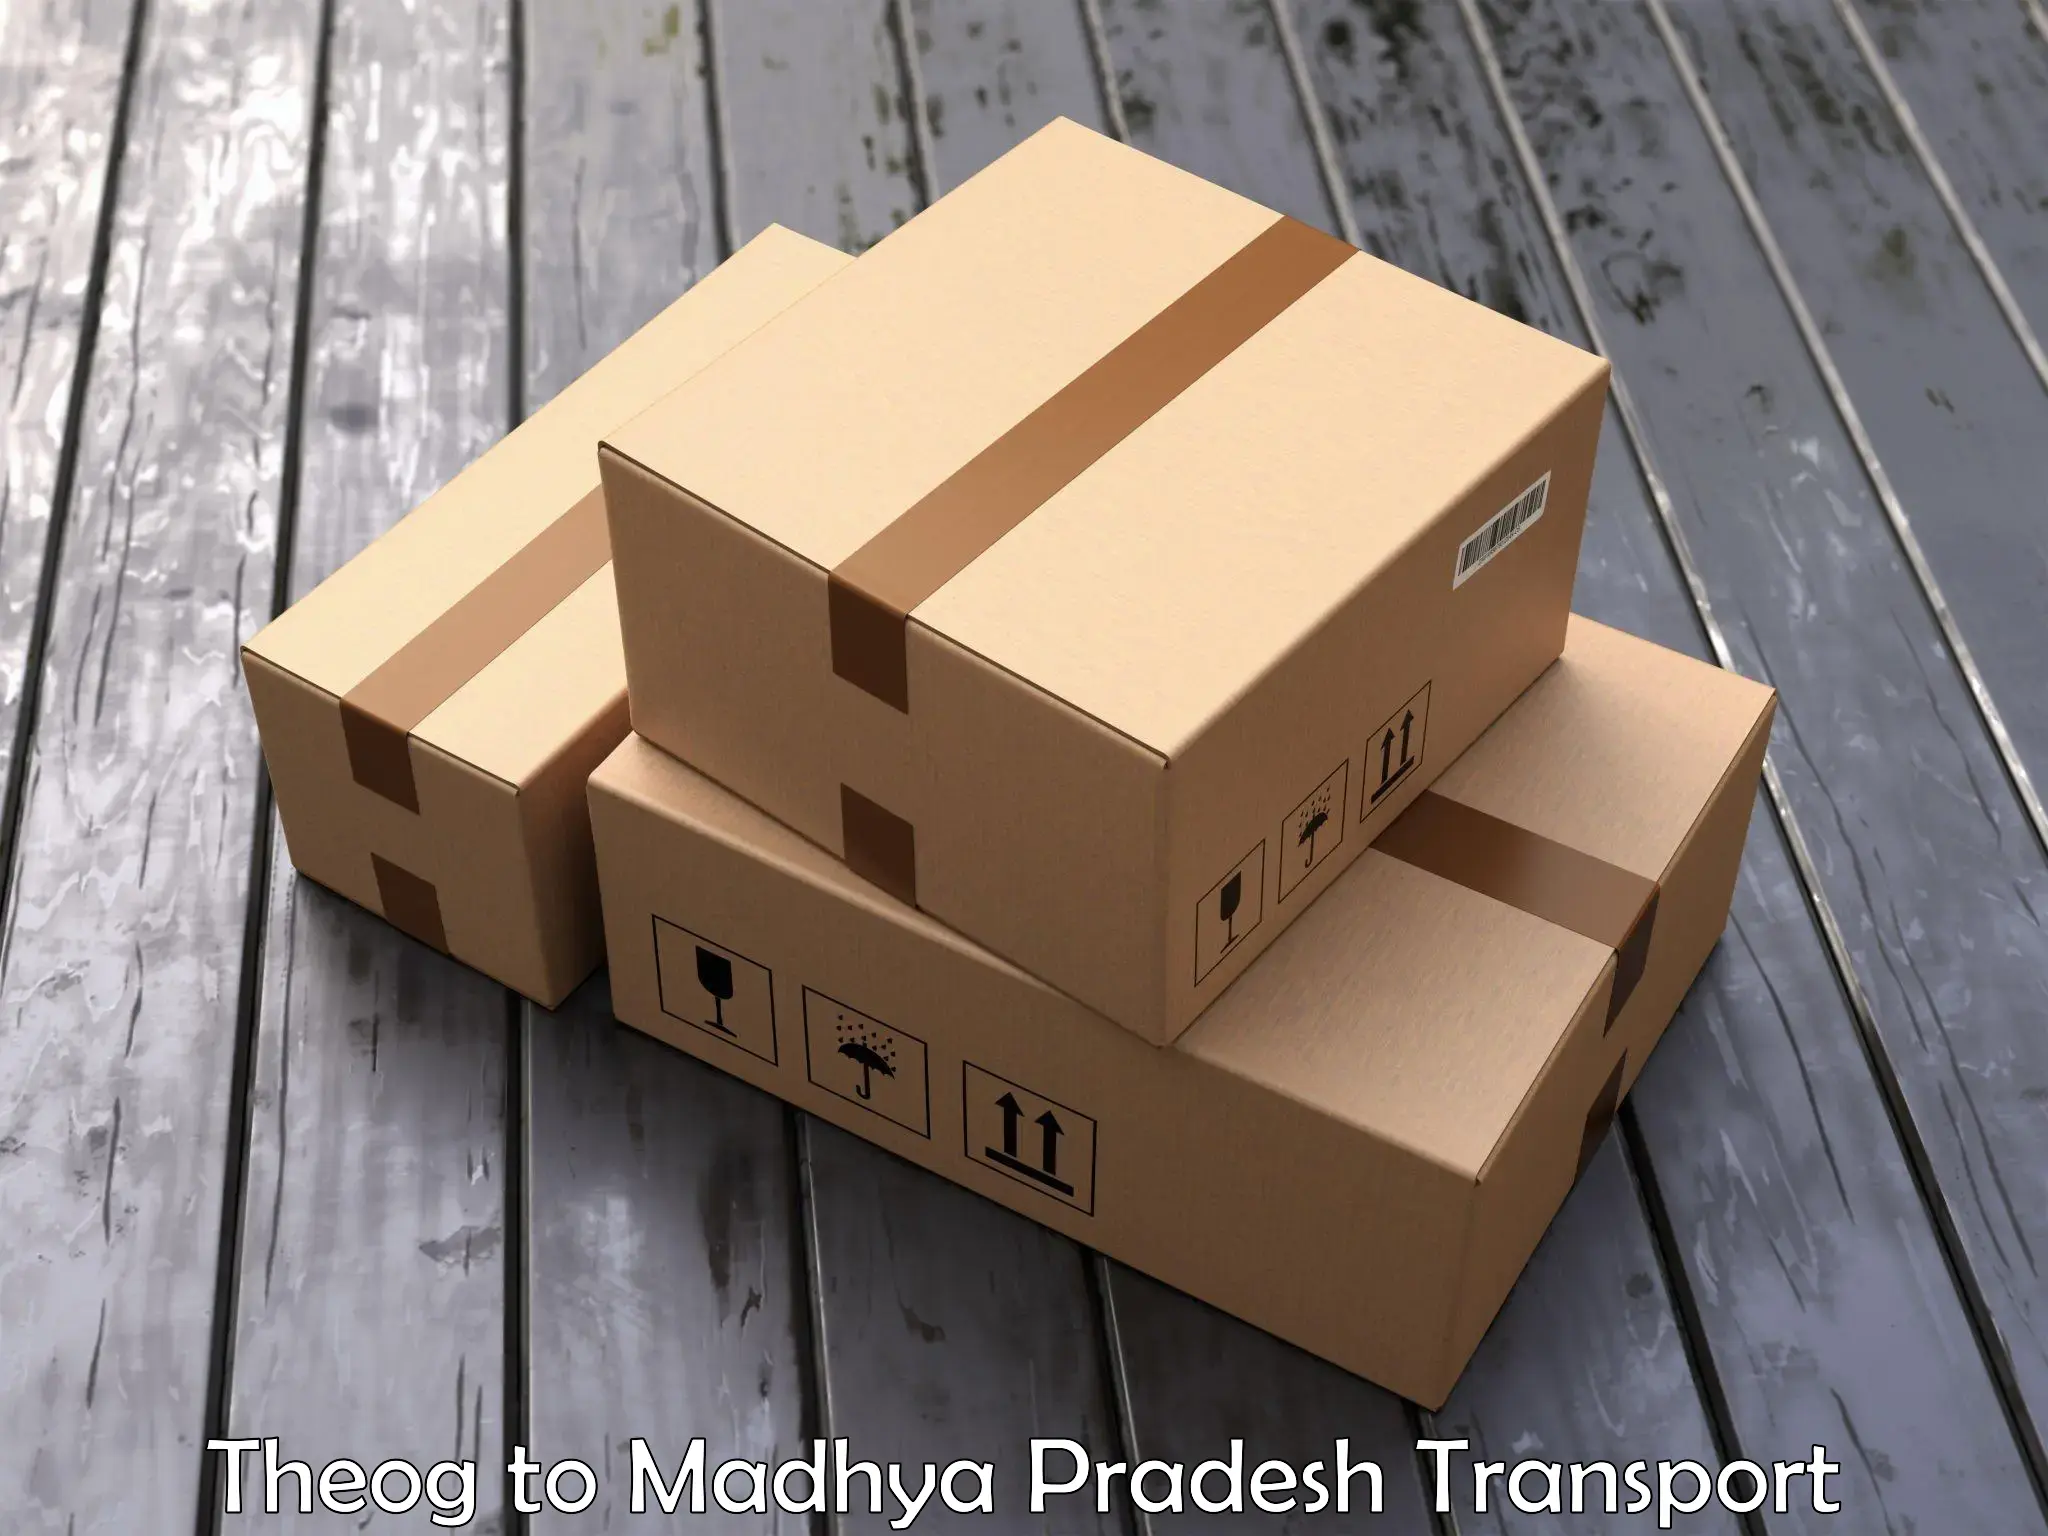 Truck transport companies in India Theog to Chand Chaurai